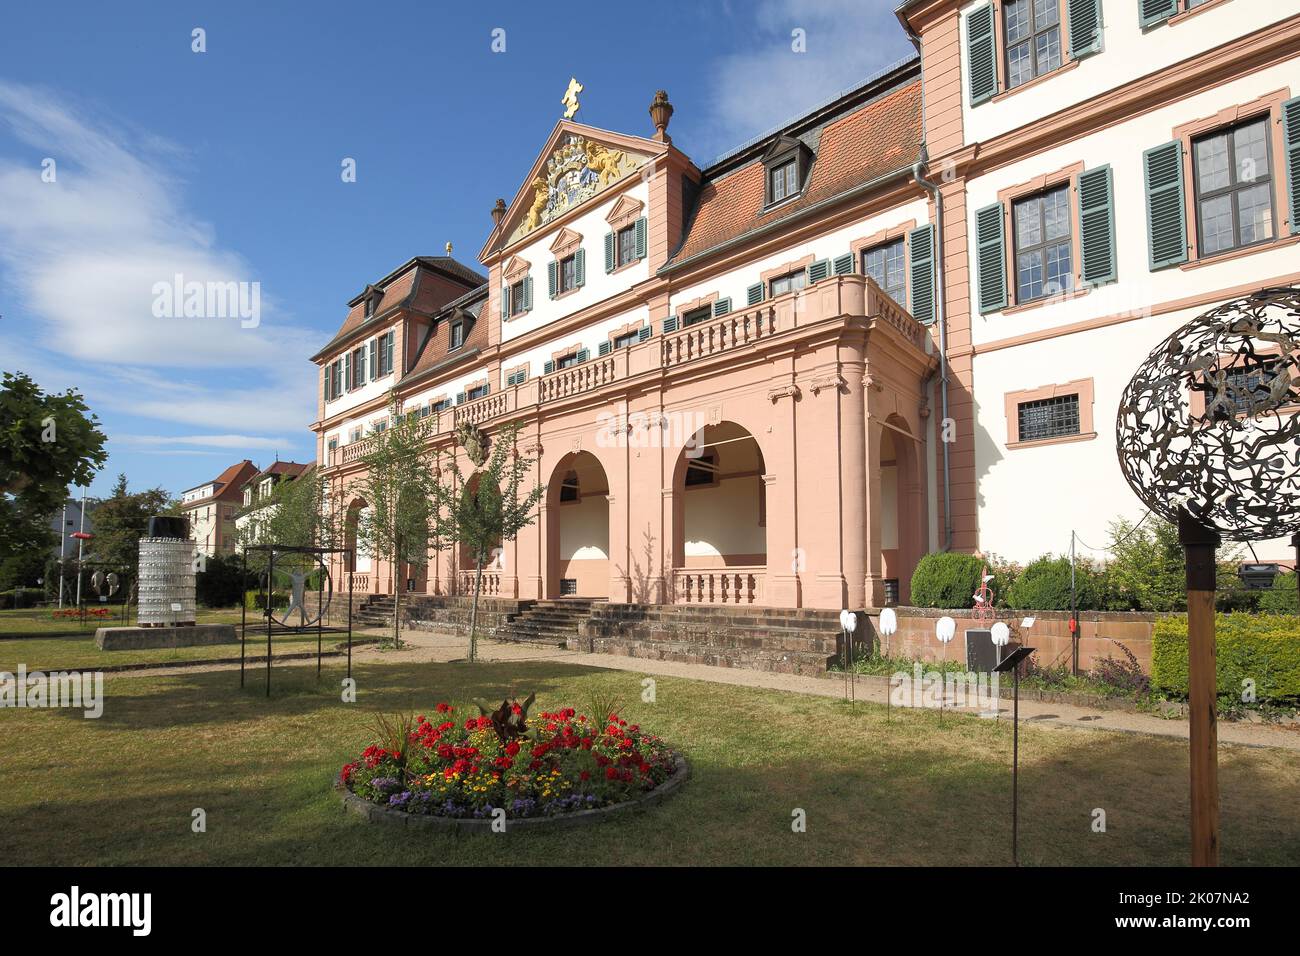 Late Baroque Cellar Castle or Red Castle in Hammelburg, Lower Franconia, Franconia, Bavaria, Germany Stock Photo